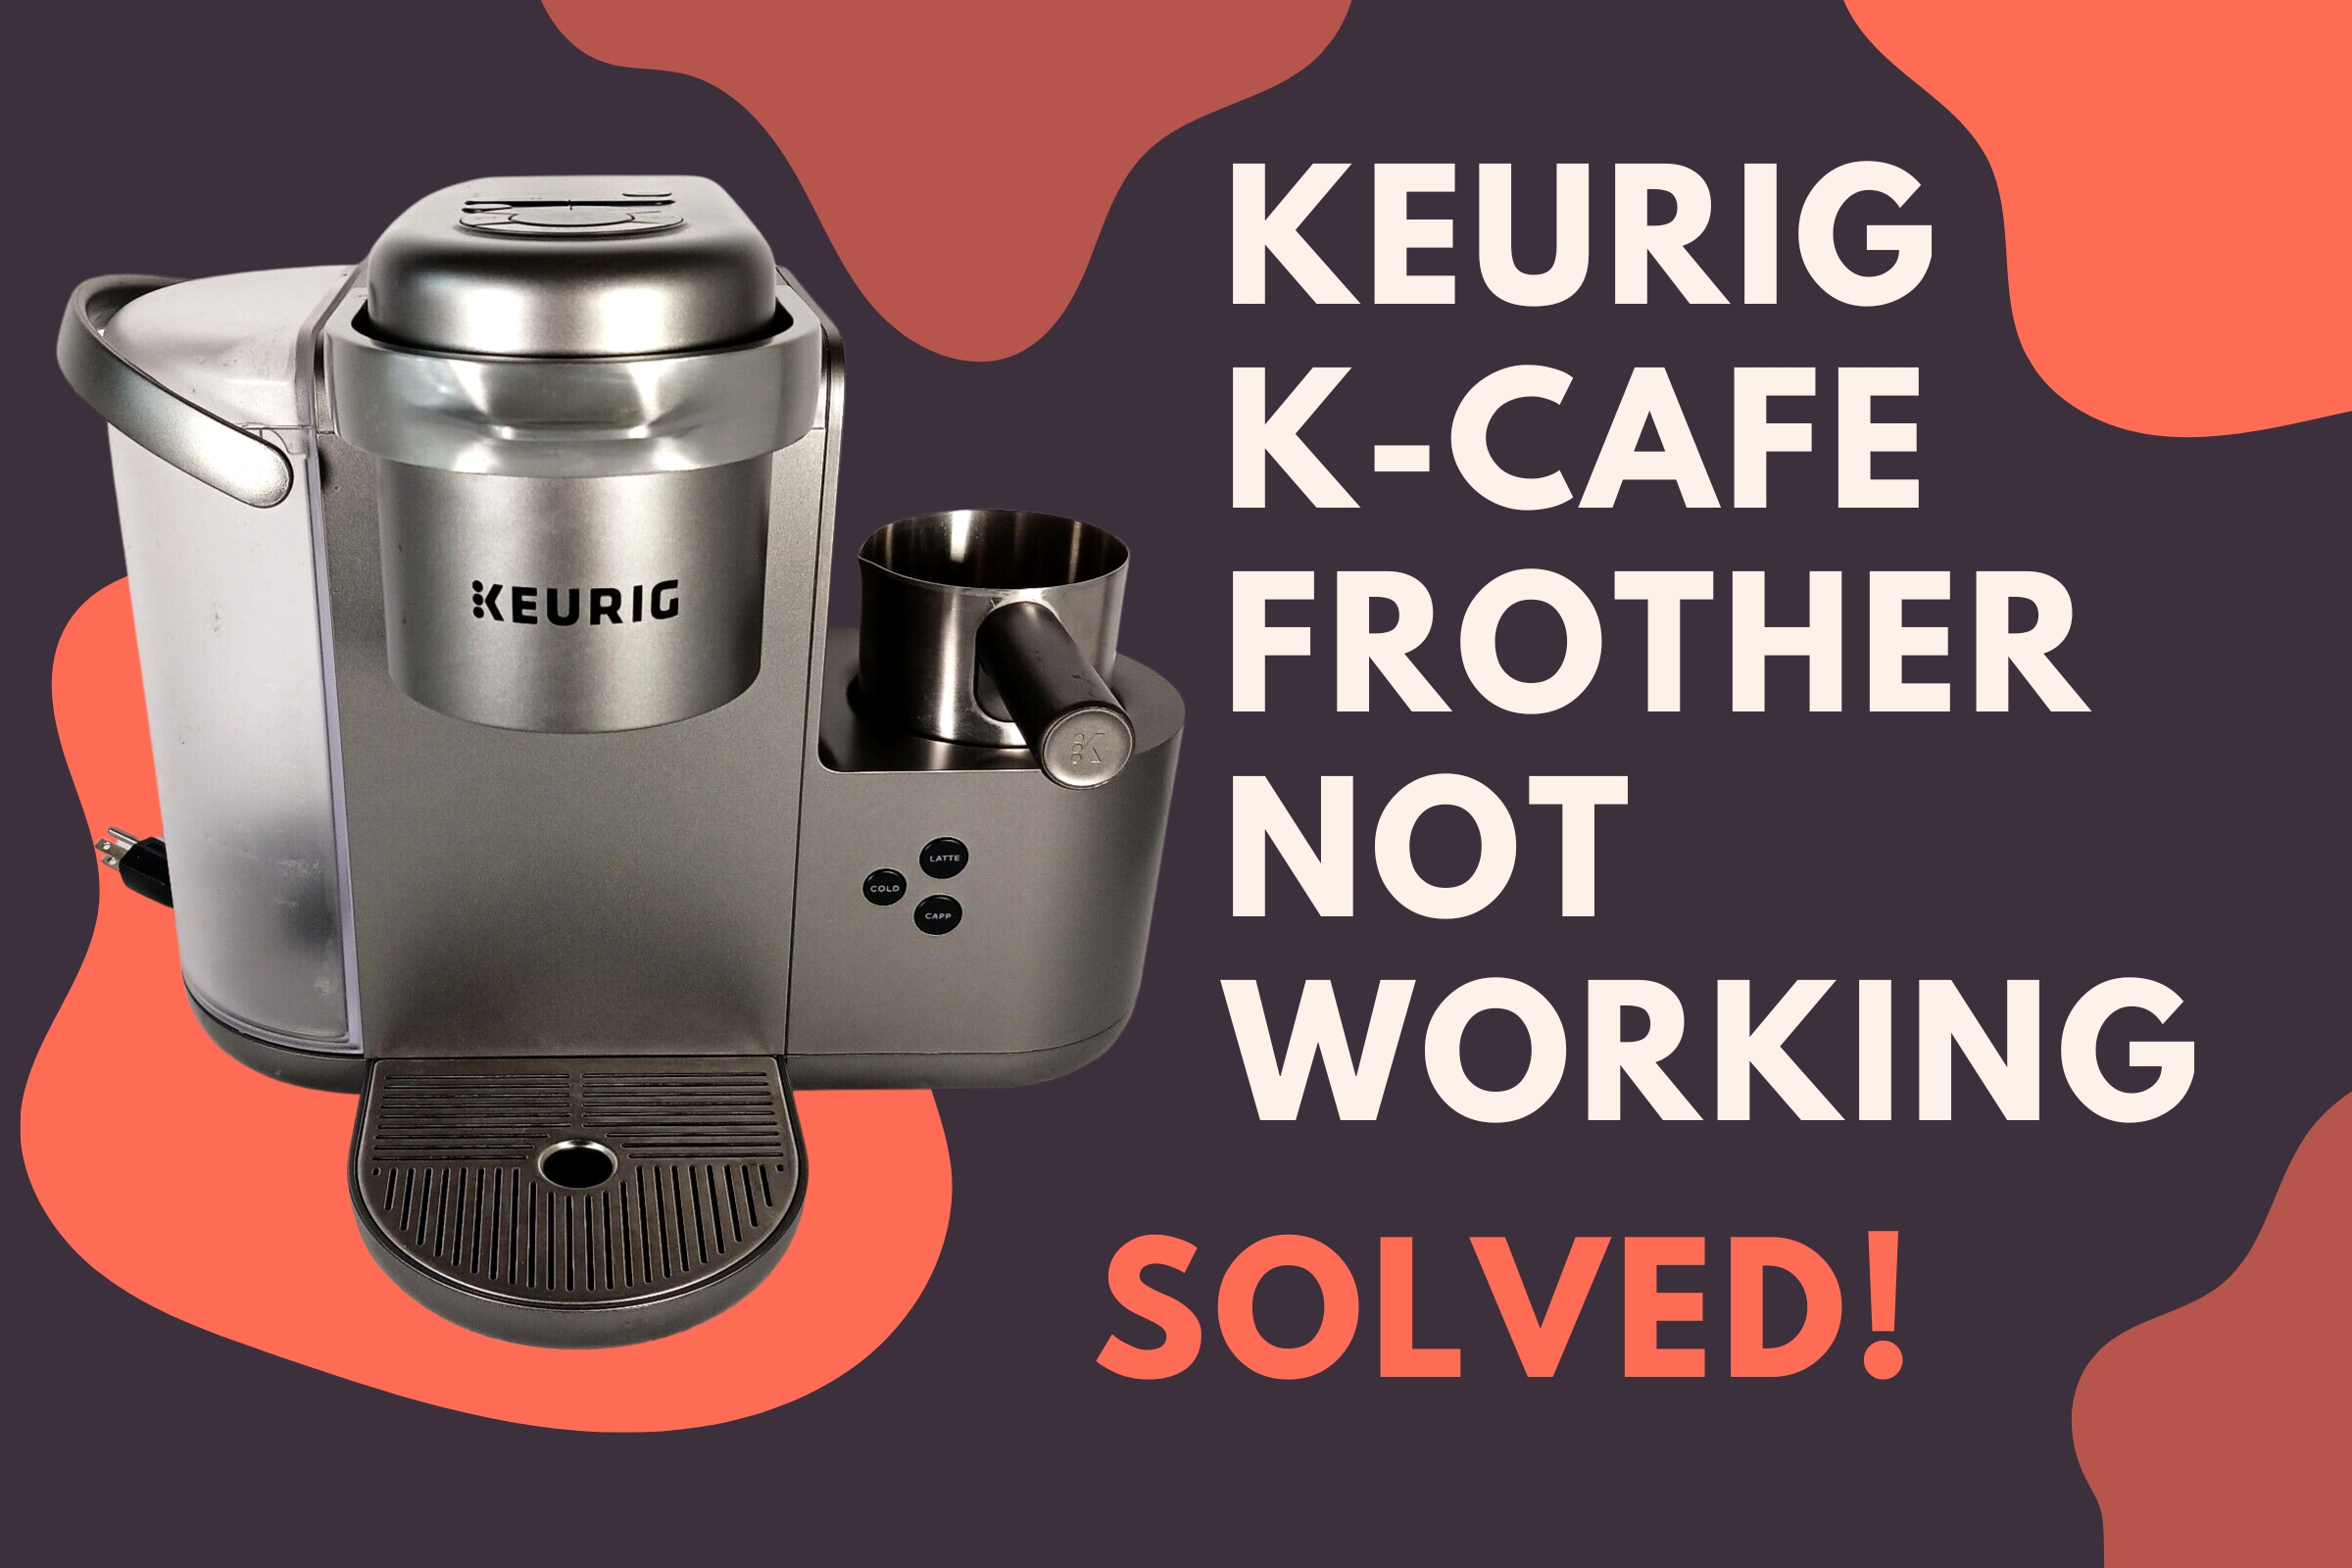 keurig k-cafe frother not working